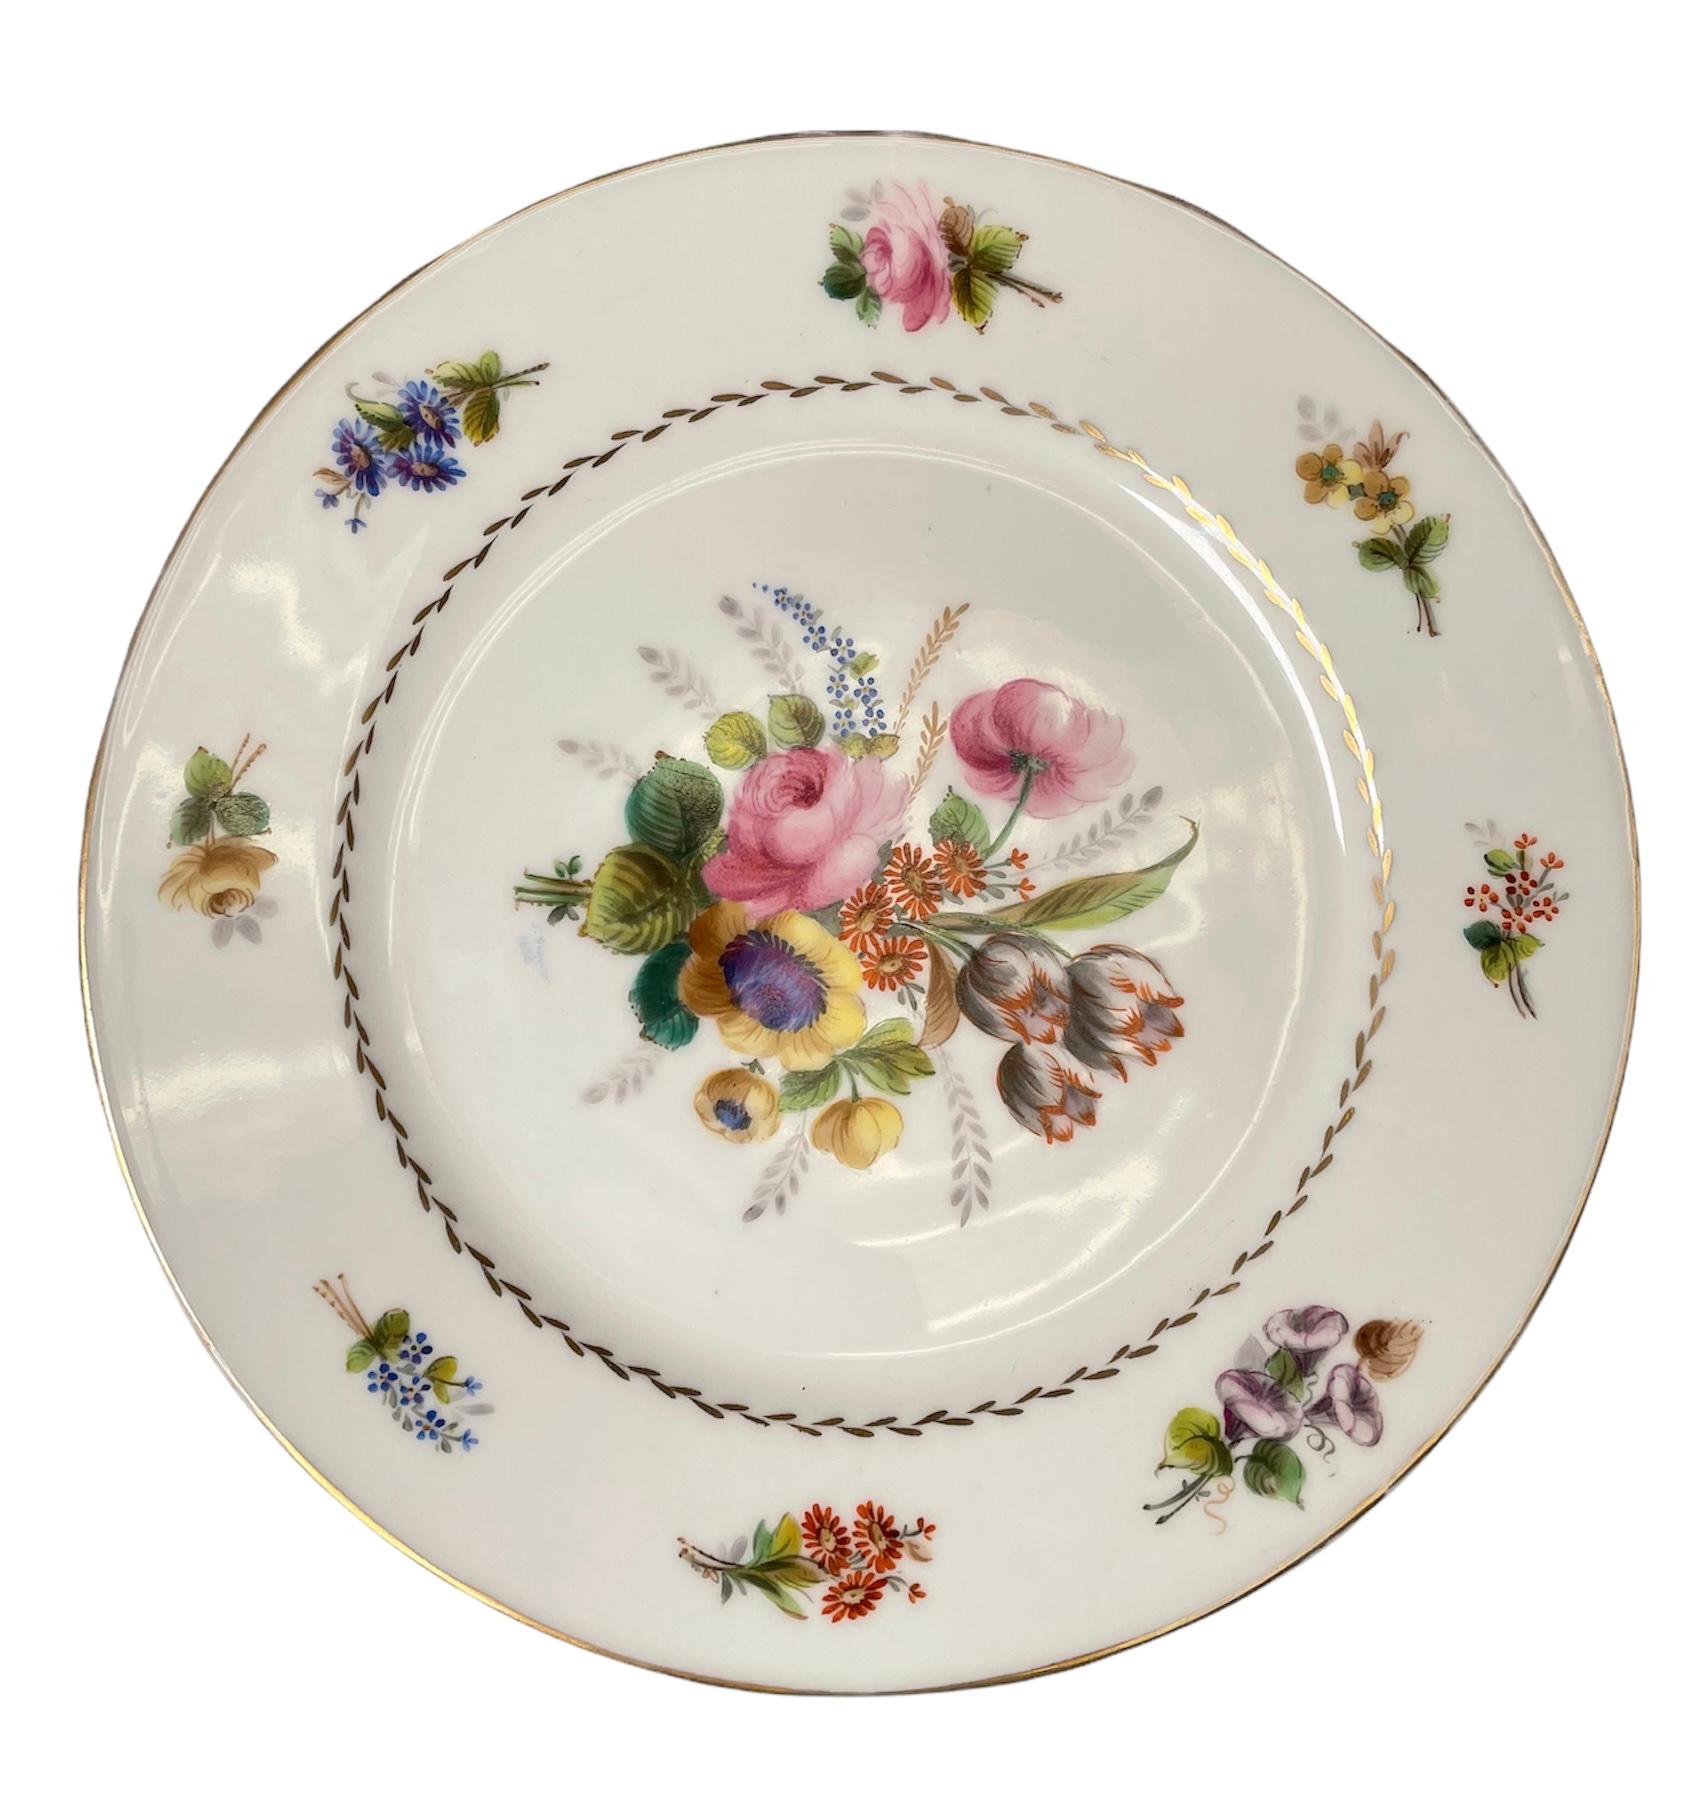 This is a set of six lunch or dessert porcelain plates from the Collection of the Manoir Montsalvy. They belong to the collections #2, 6, 7, 10, 11 and 12. They are hand painted with bouquets of flowers in the center and tiny bouquets around the